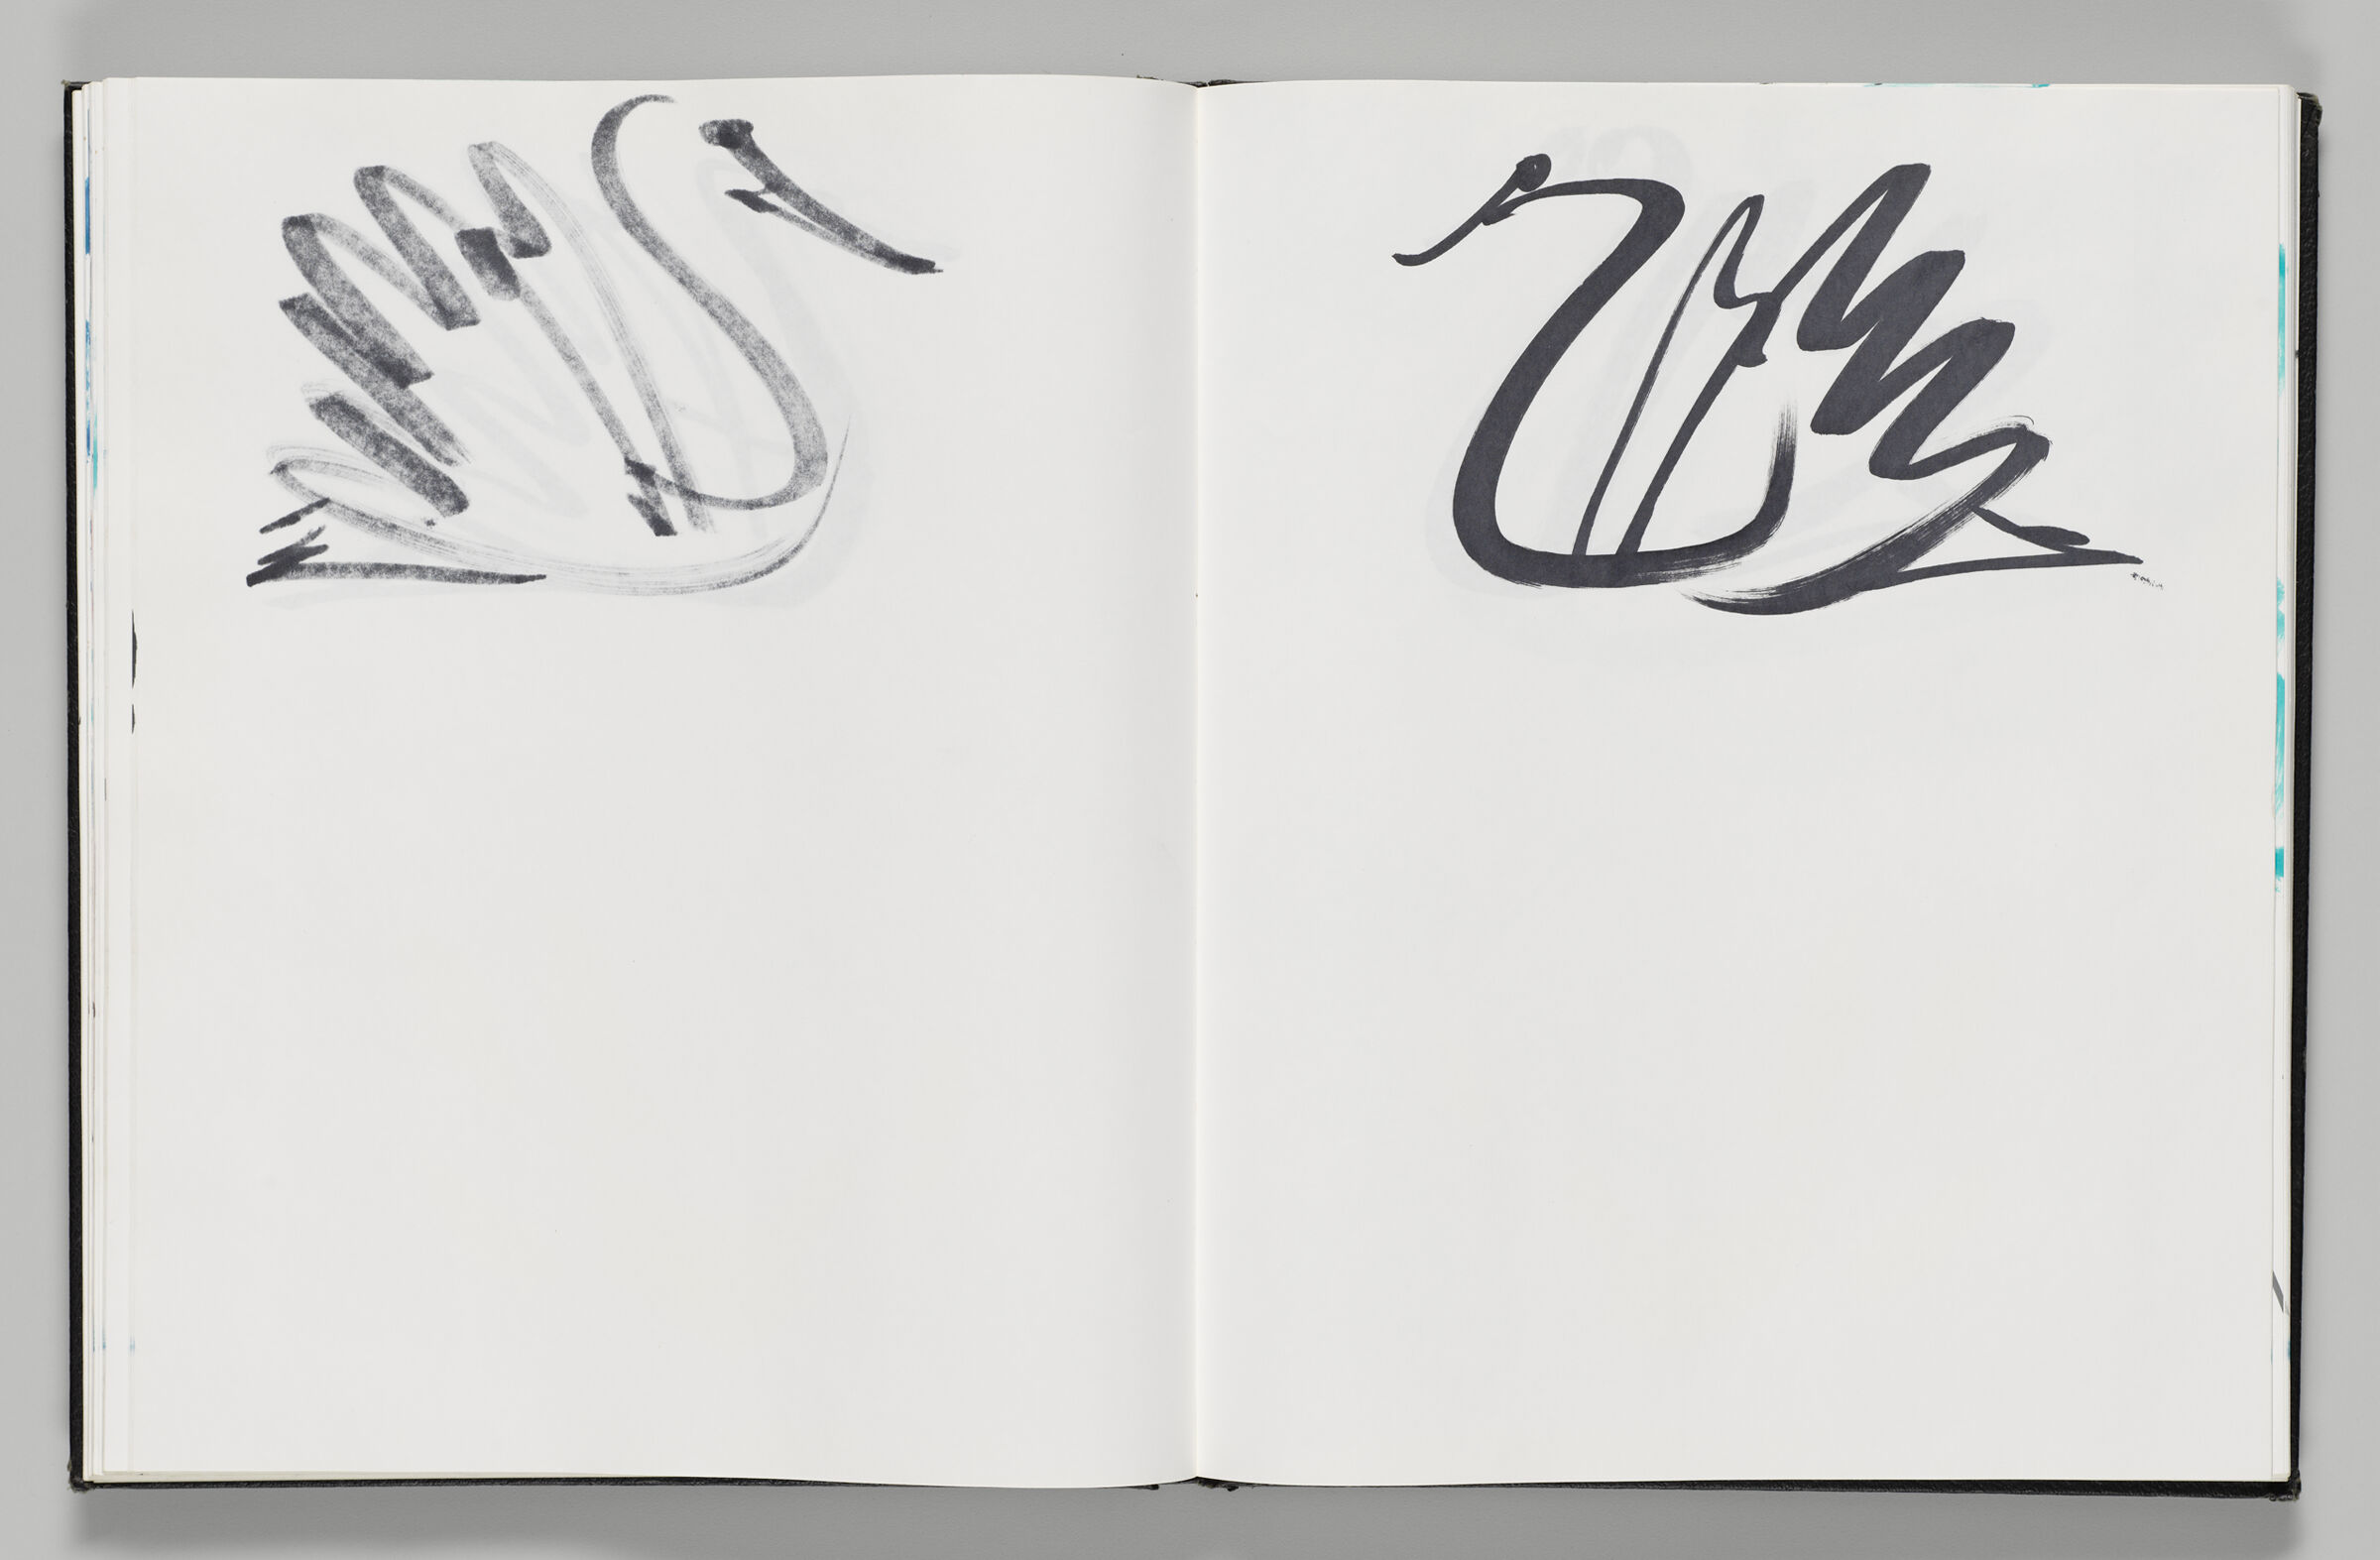 Untitled (Bleed-Through Of Previous Page, Left Page); Untitled (Swan, Right Page)